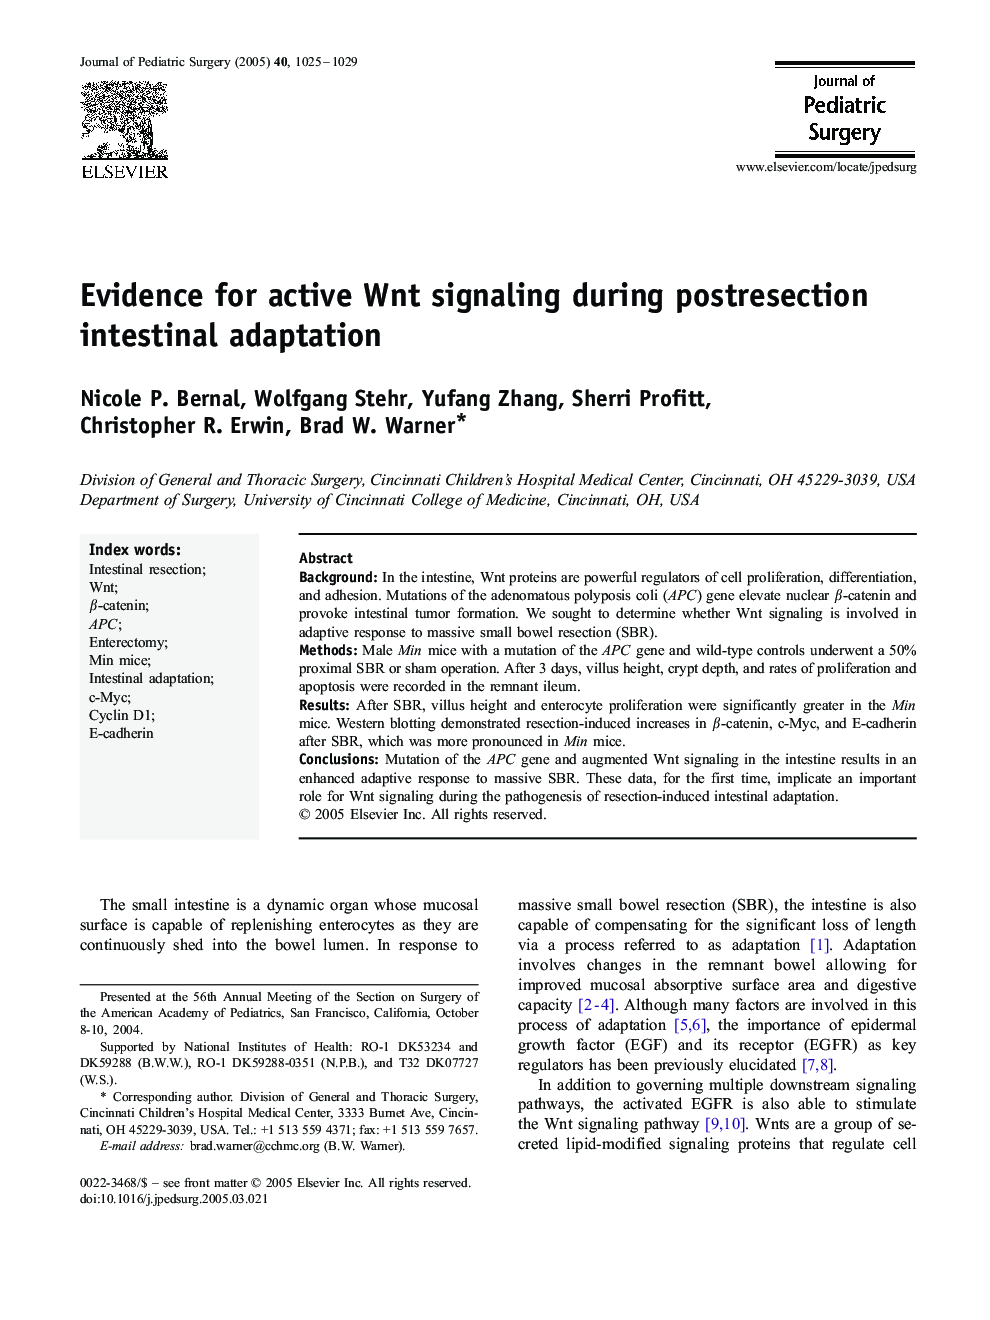 Evidence for active Wnt signaling during postresection intestinal adaptation